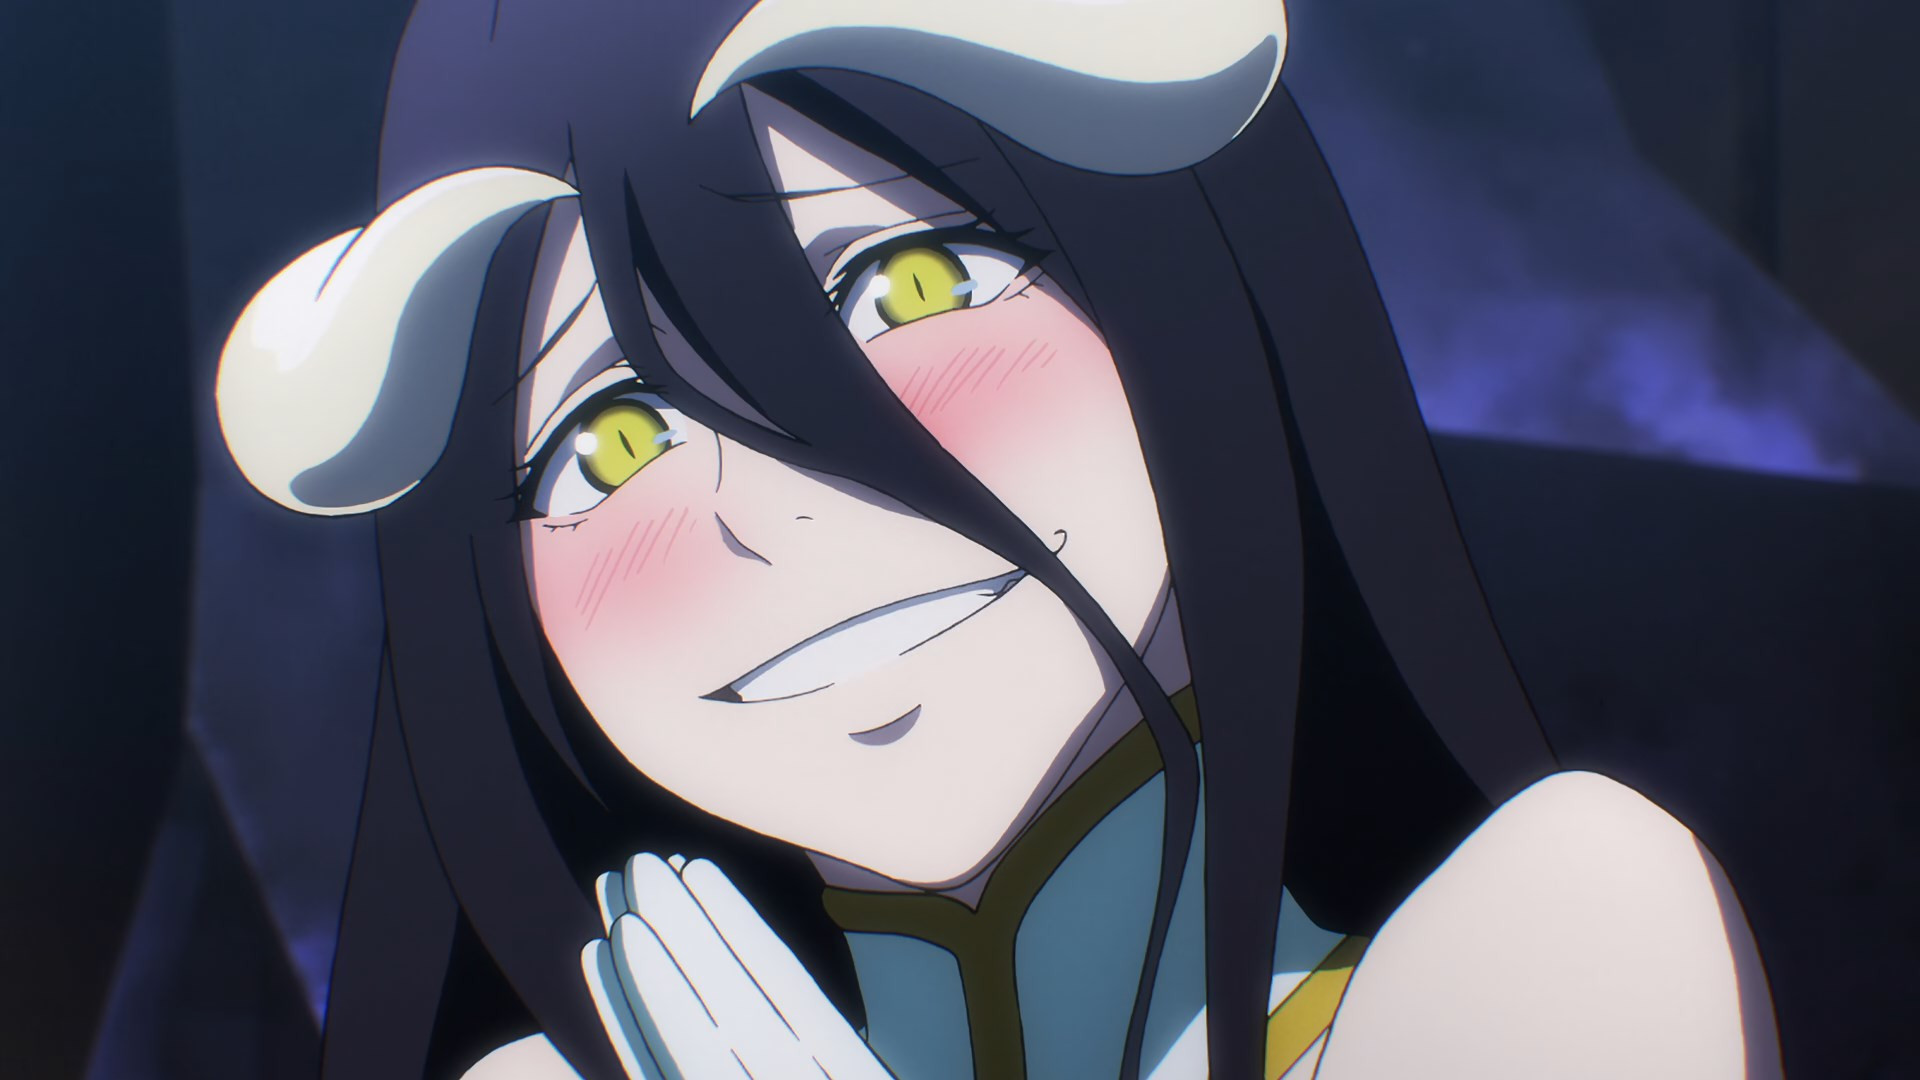 Lupu is the new face of kissanime~su : r/overlord